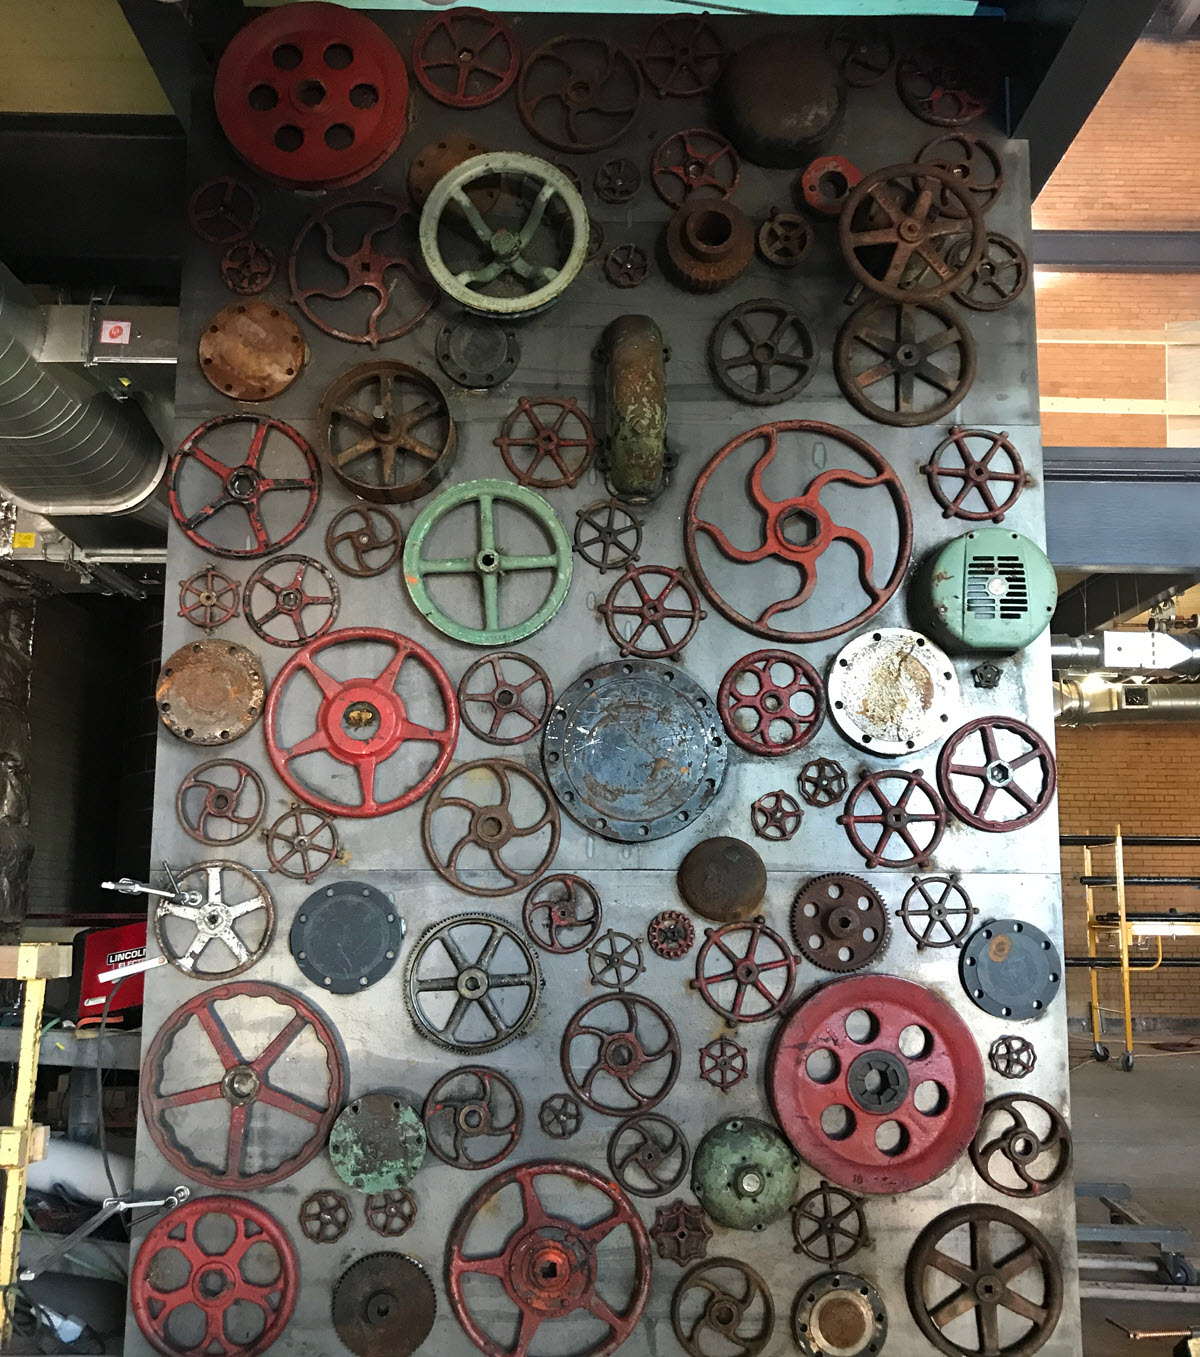 Photo of completed STEM art piece installed in the facility